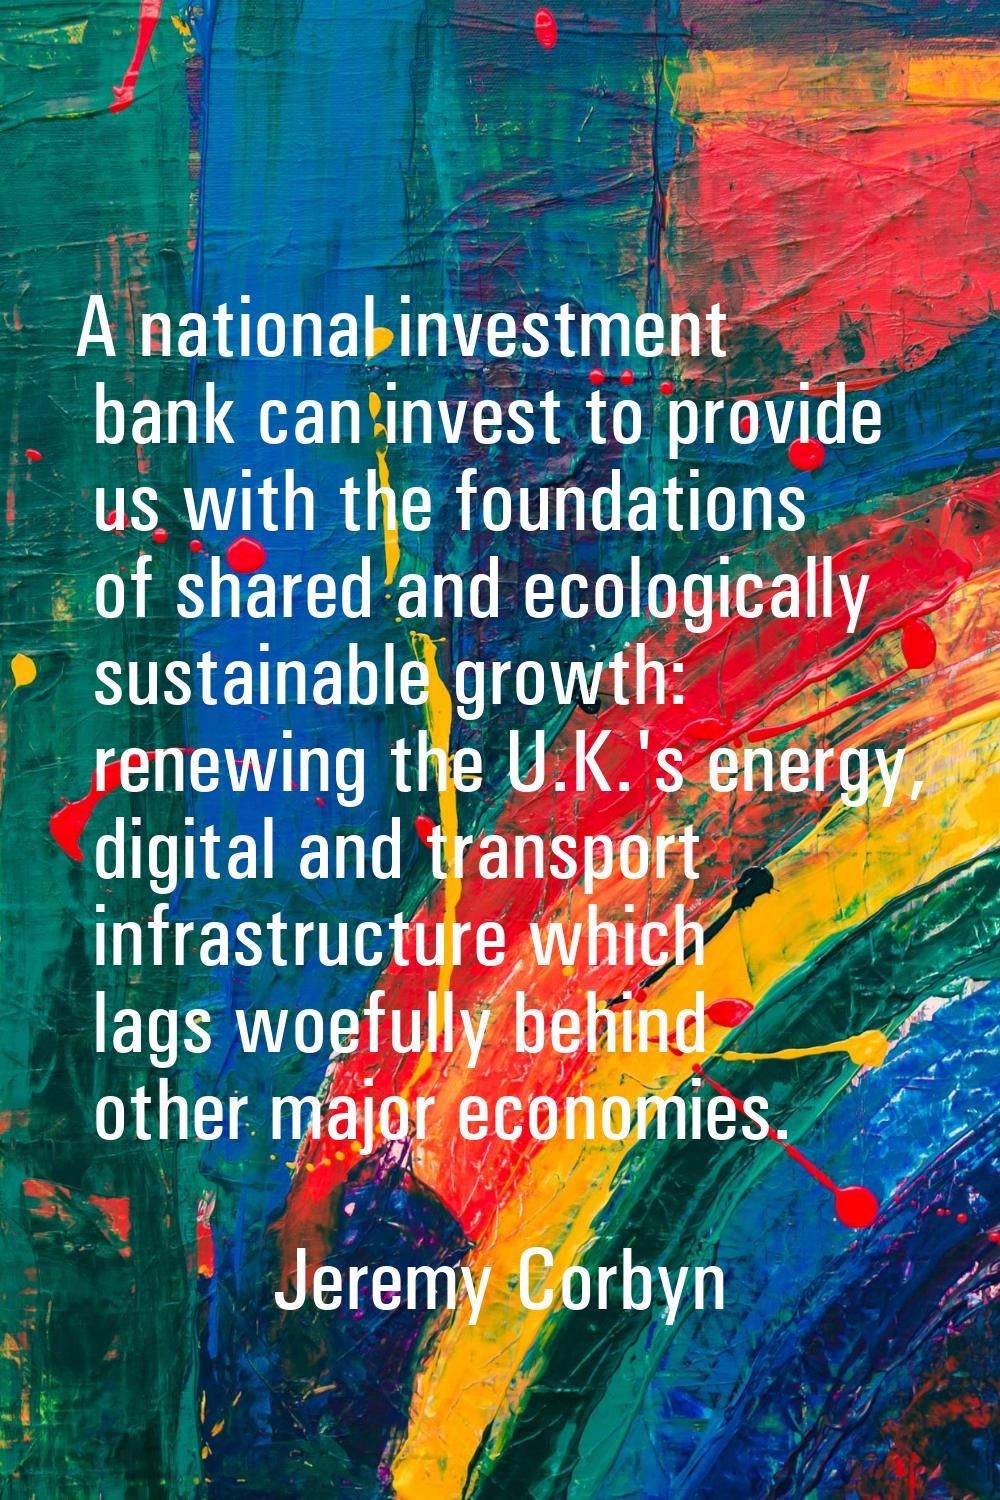 A national investment bank can invest to provide us with the foundations of shared and ecologically